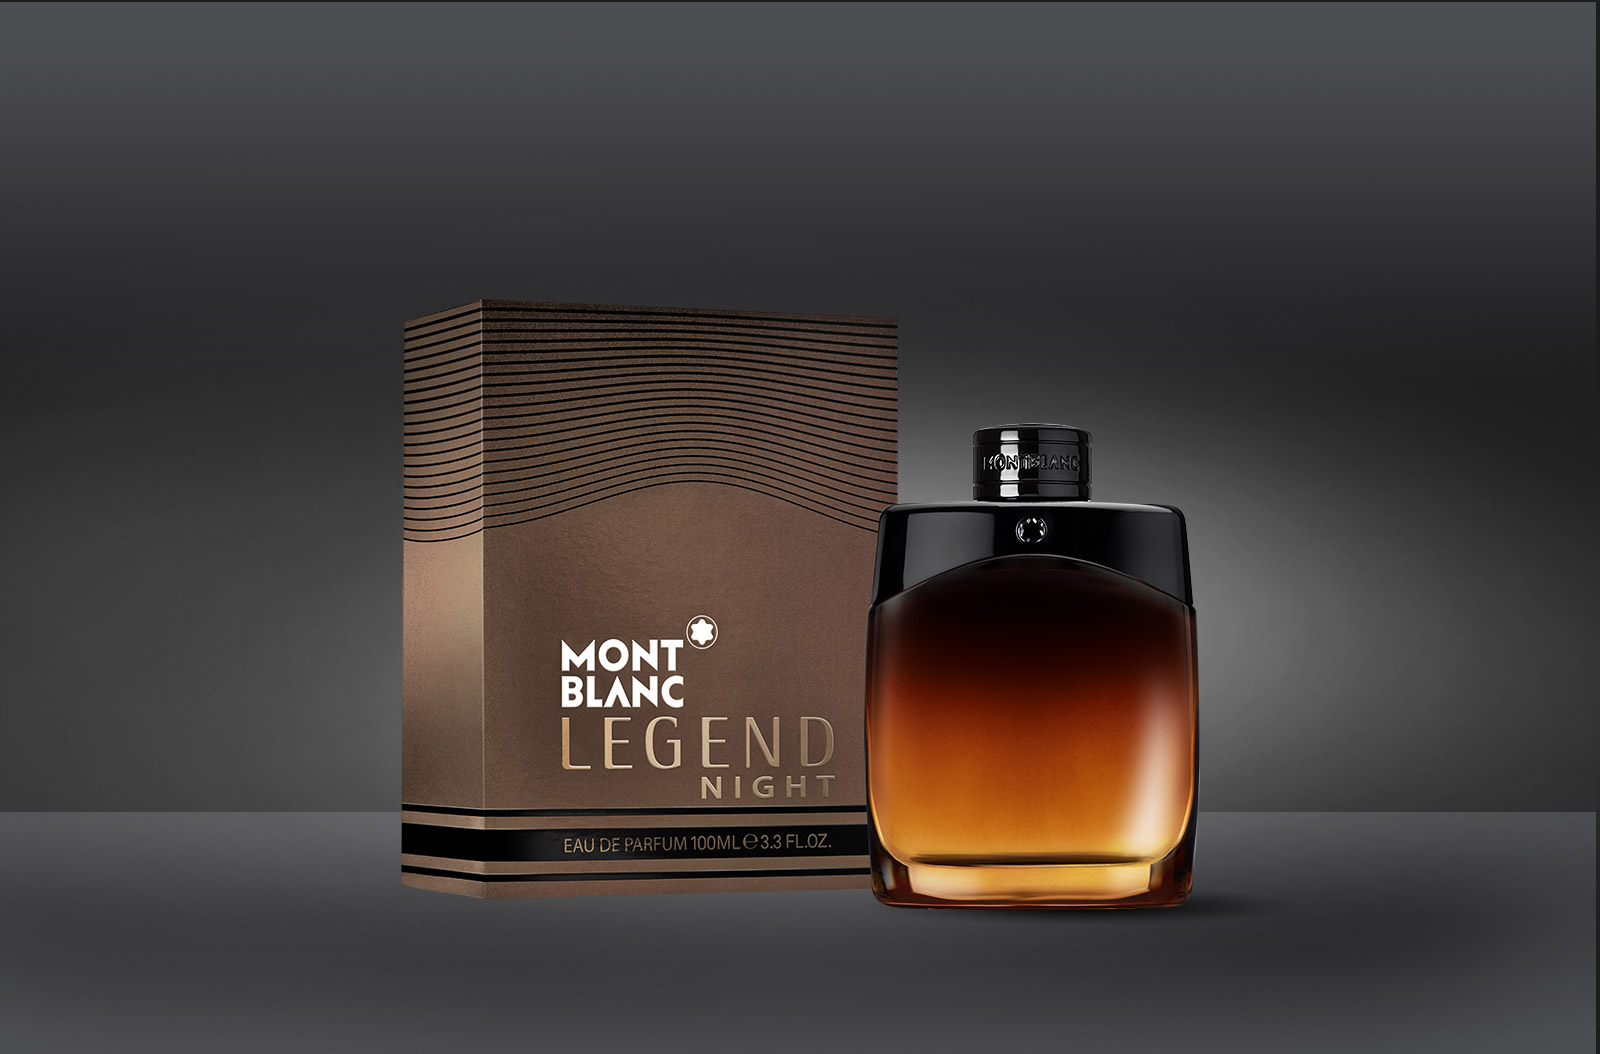 The aromatic notes of clary sage and peppermint, enhanced with cool spices (cardamom) and sparkling bergamot, set the fragrance’s fresh and lively tone. The opening is bright, like the natural radiance of our man’s aura. The middle notes immediately counterbalance this first impression of refreshing coolness with their warm elegance. The precious scents of cedar wood blend well with the floral lavender tones, a classic in men's fragrances, and slightly powdered violet.